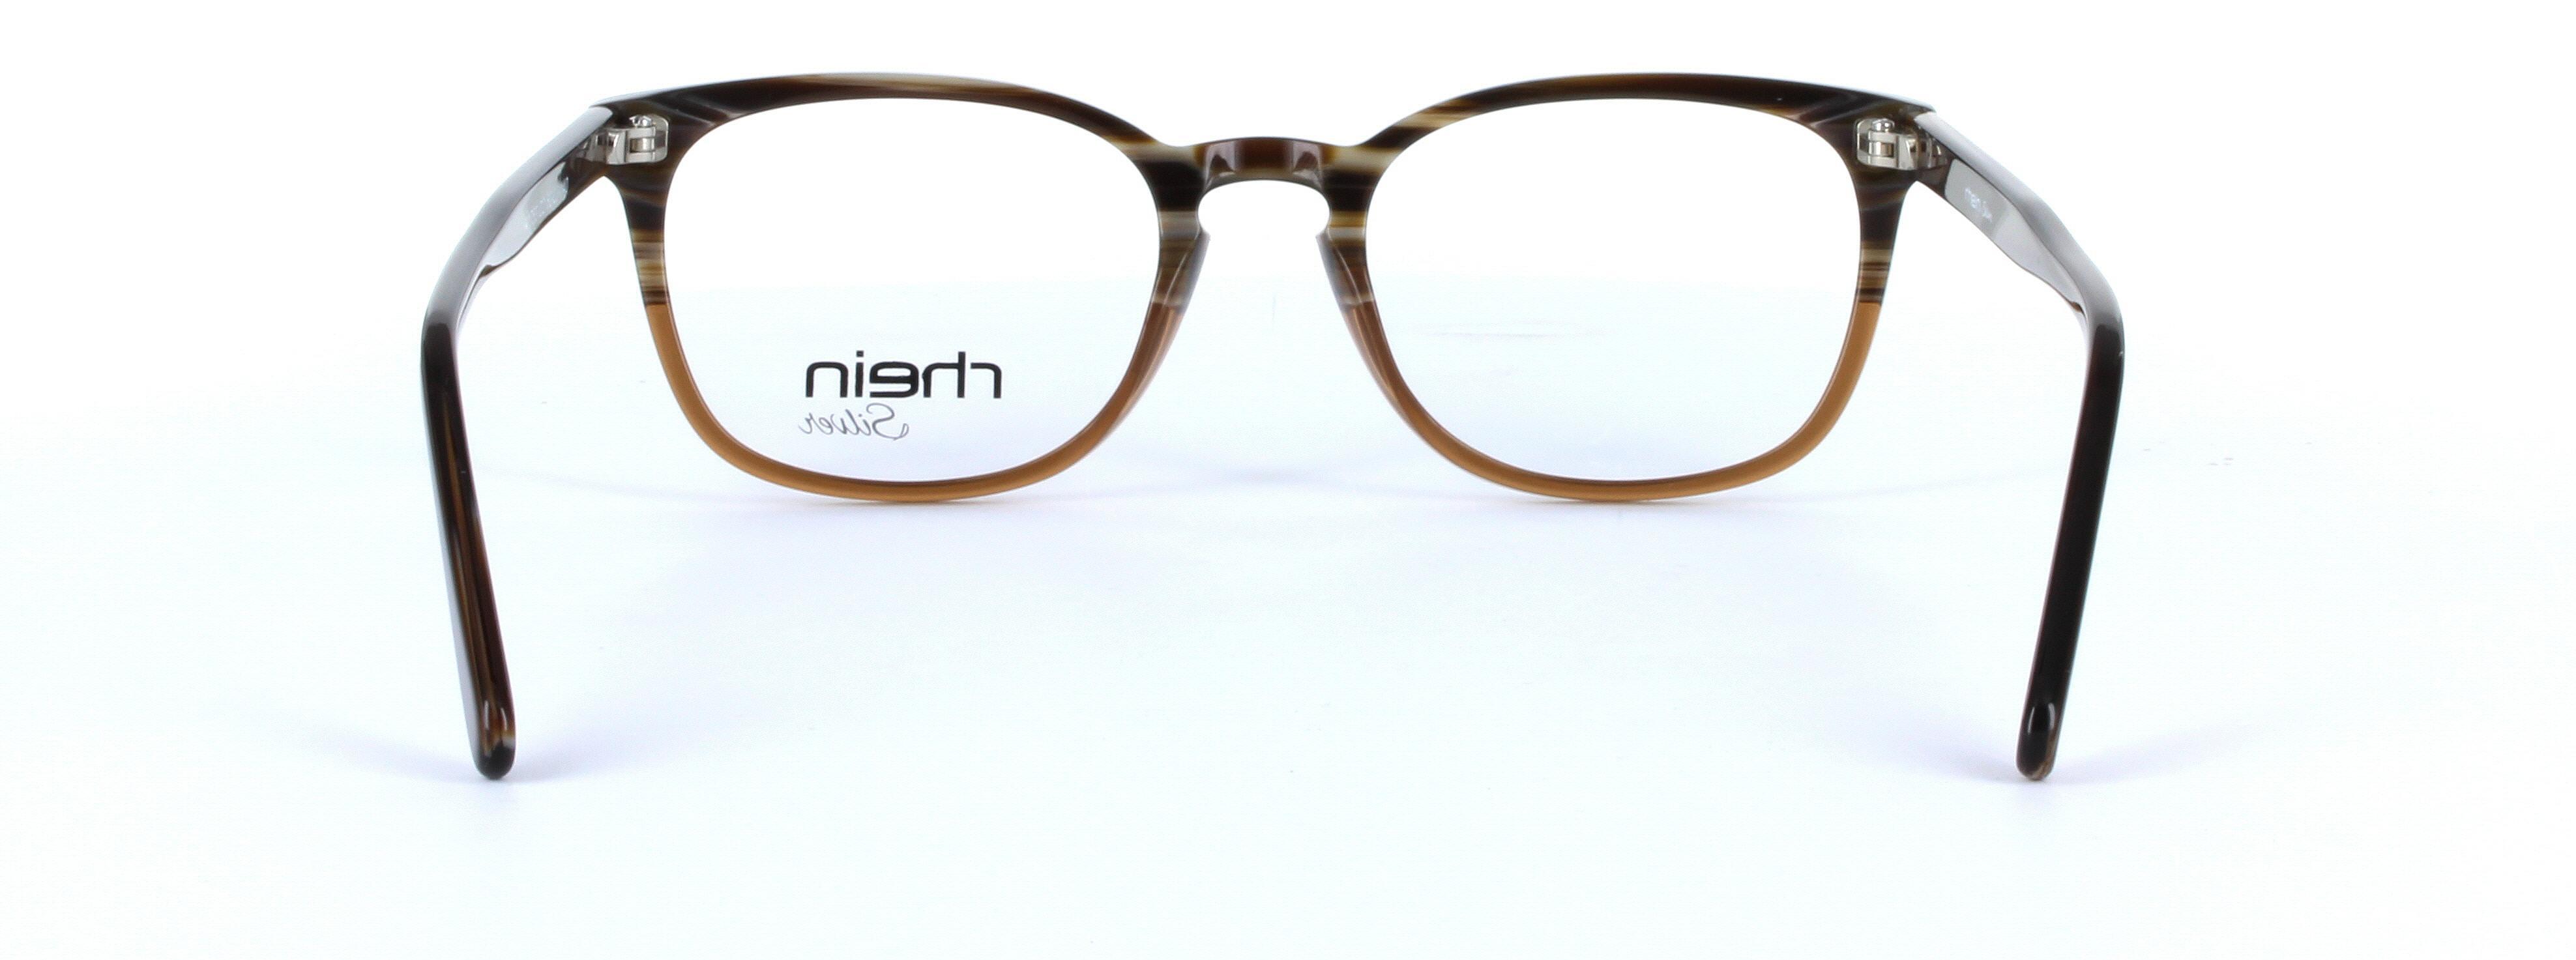 Comet Brown and Light Brown Full Rim Oval Plastic Glasses - Image View 3